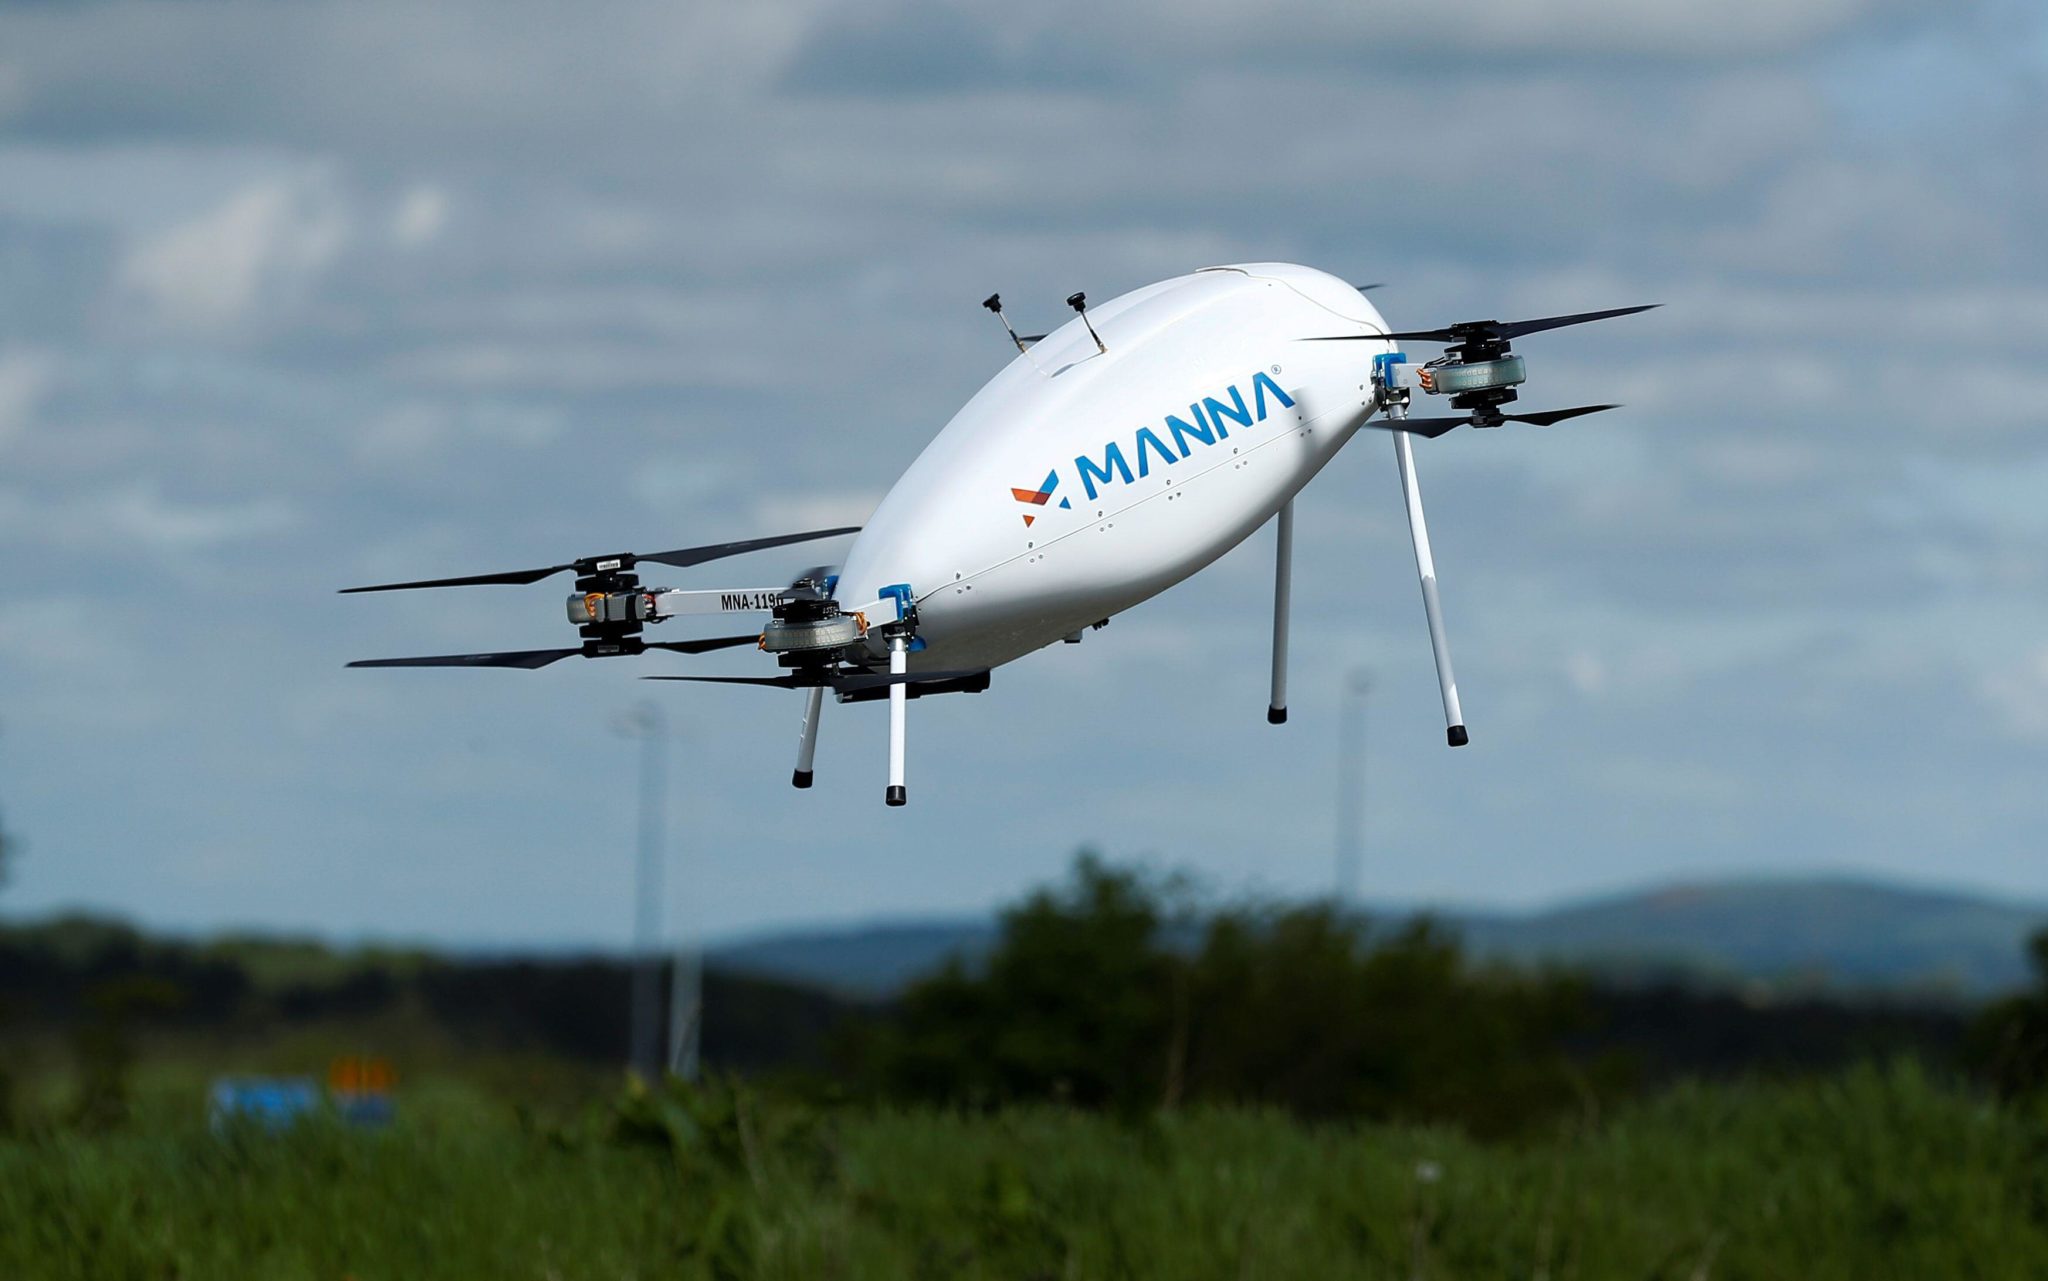 A Manna Aero drone is seen as it delivers essential household and medical supplies in the village of Moneygall, Offaly. Image: REUTERS / Alamy Stock Photo